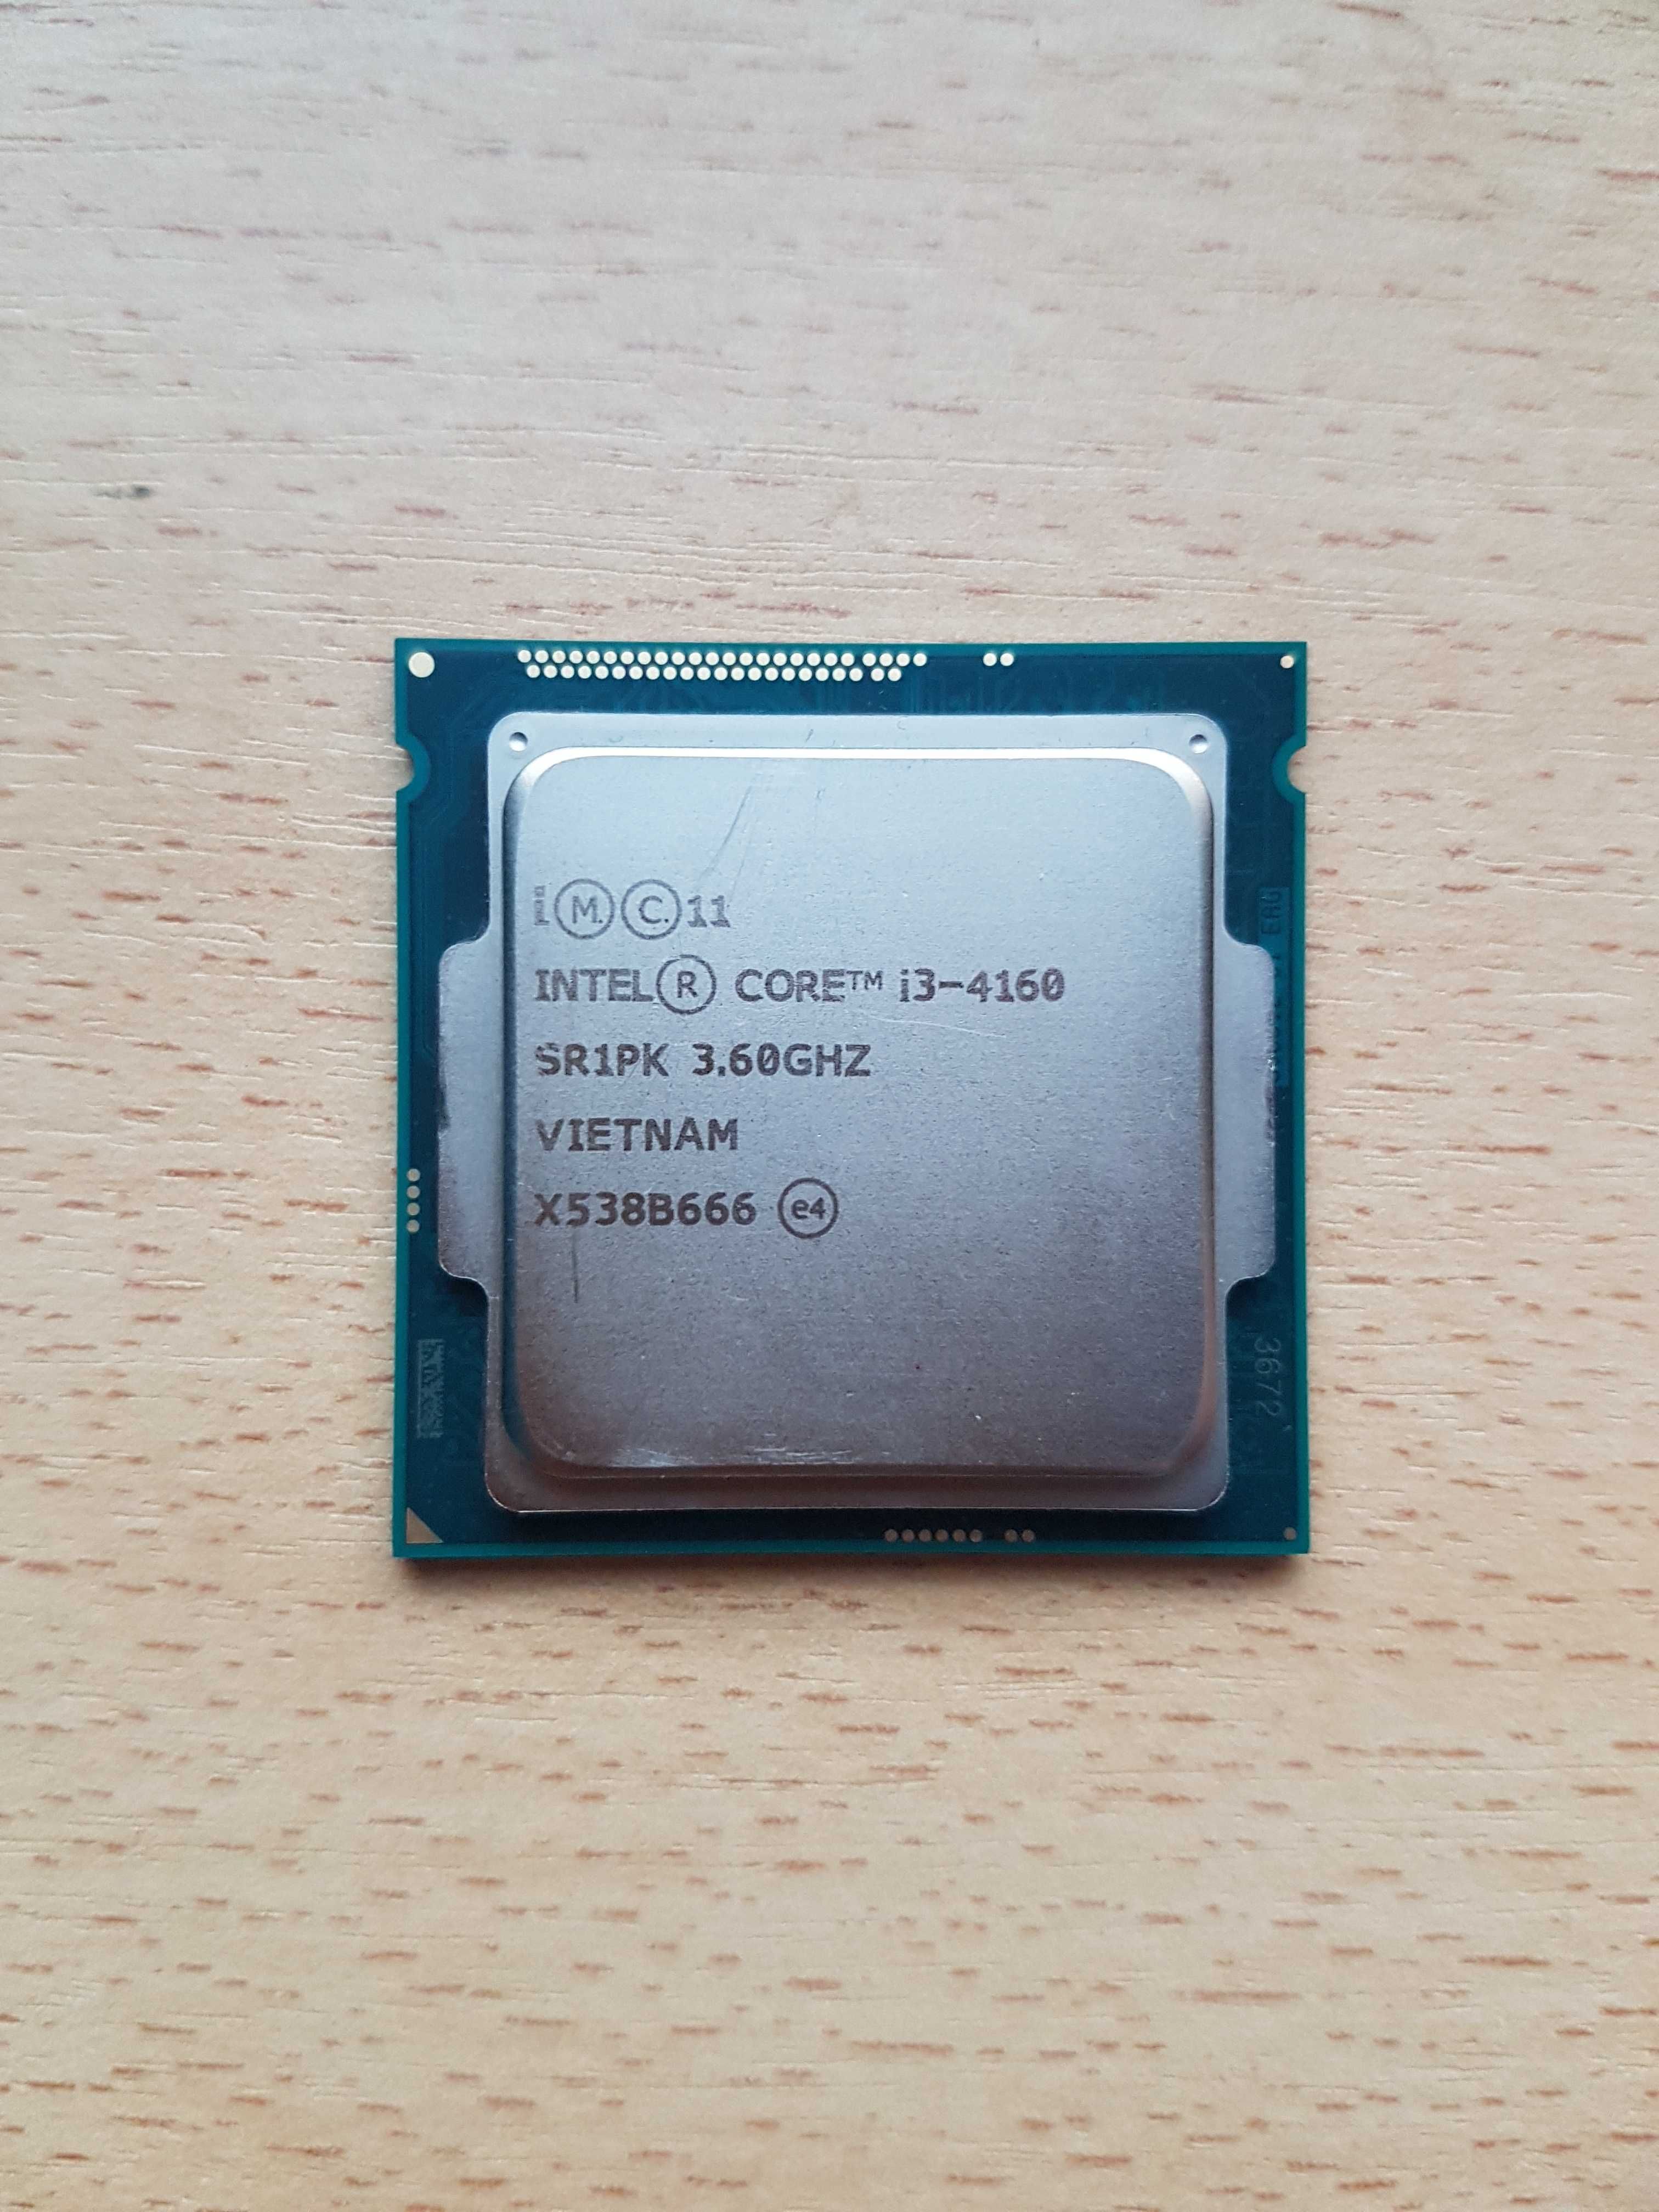 Procesor Intel Core i3-4160, 3.60GHz, Haswell, 3MB, Socket 1150